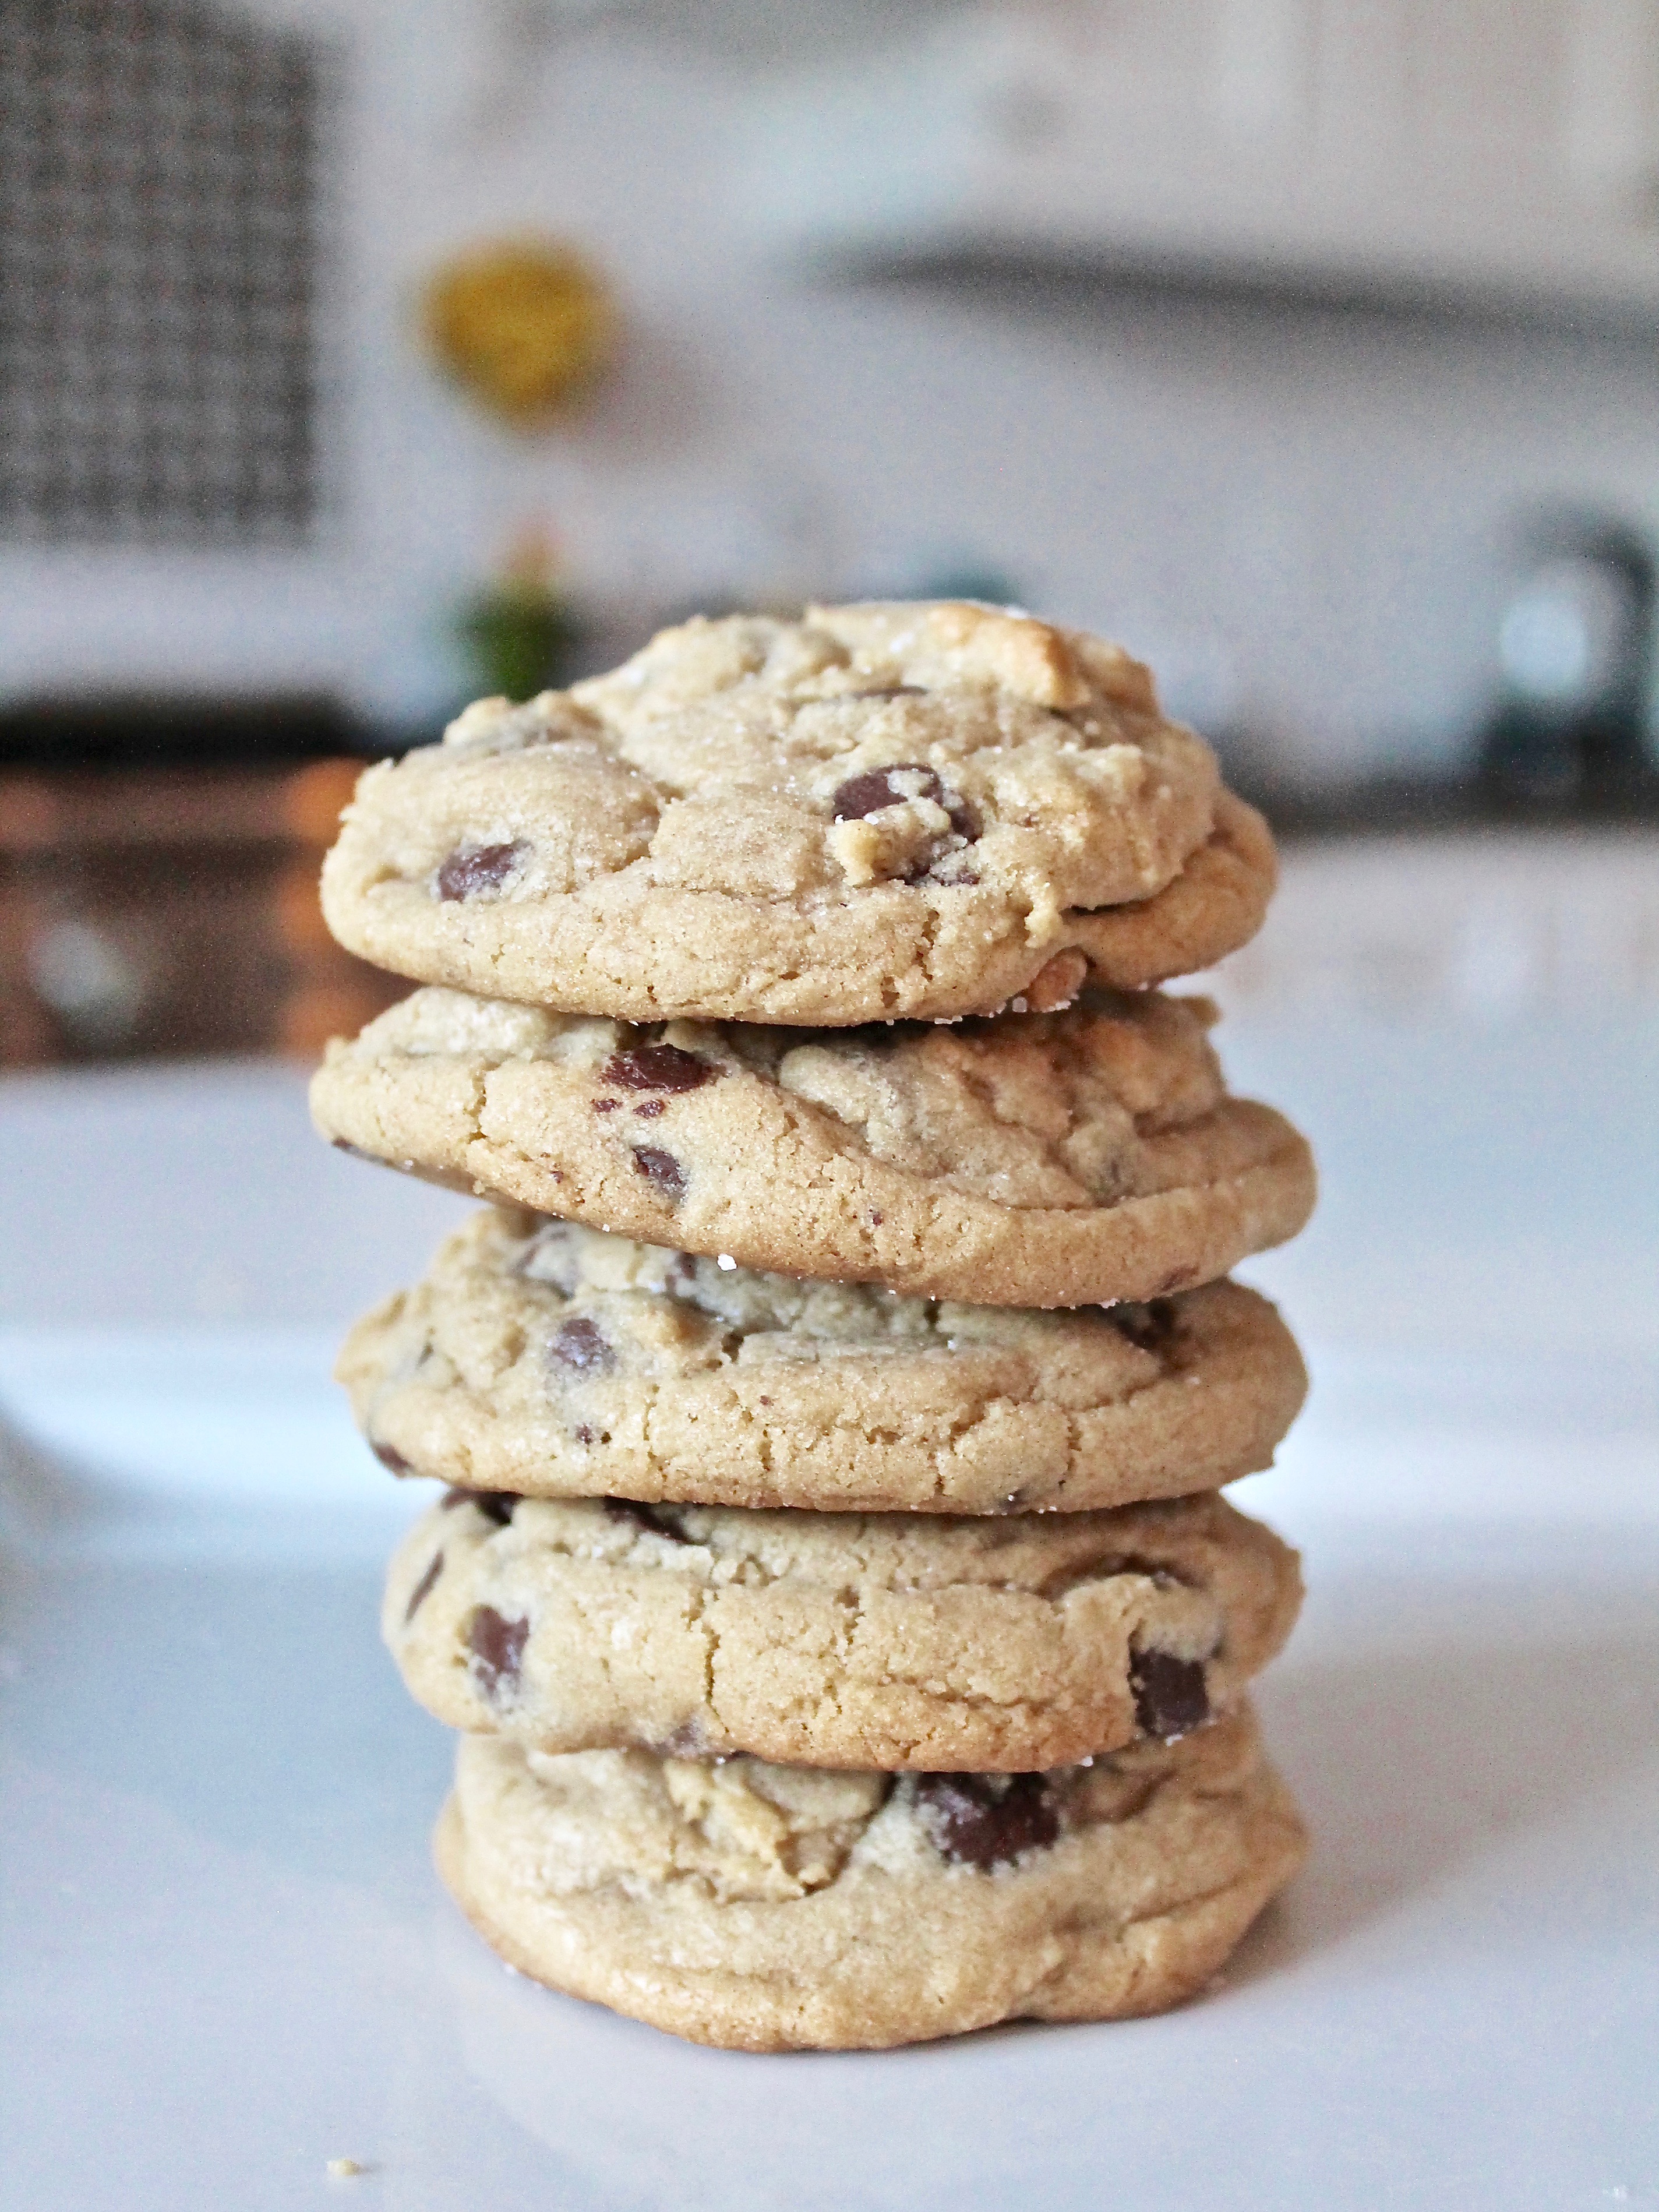 These amazing chocolate chip cookies are so soft and chewy you'll love them. www.cakebycourtney.com